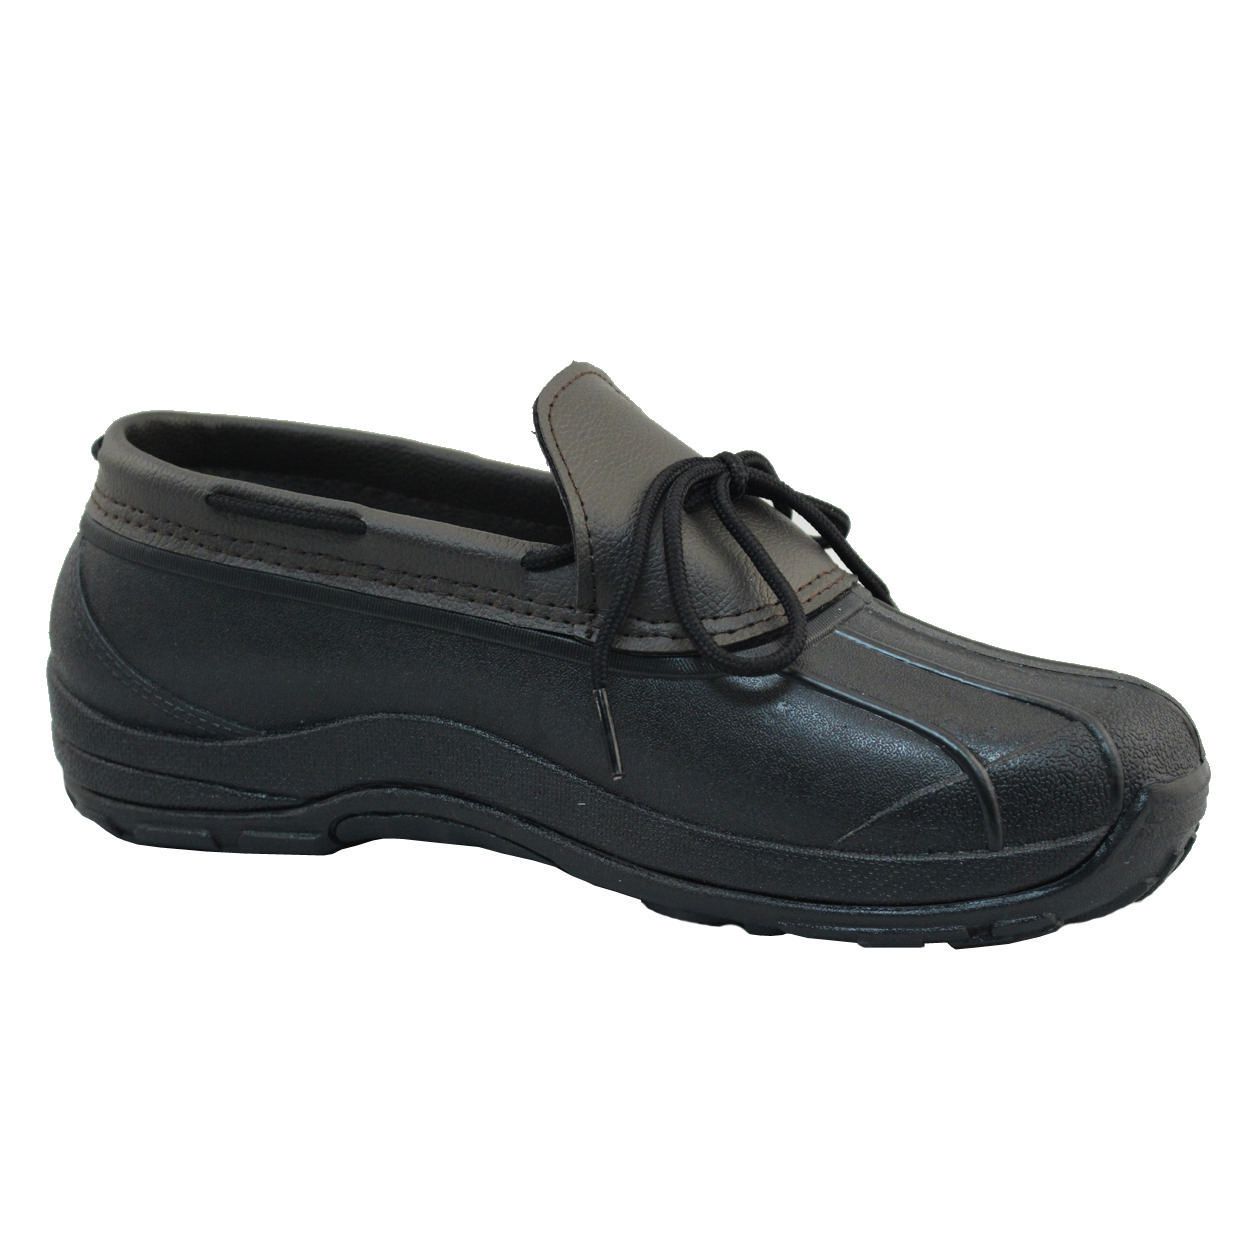 Weather Spirits Men's Ray Shoes Walmart Canada